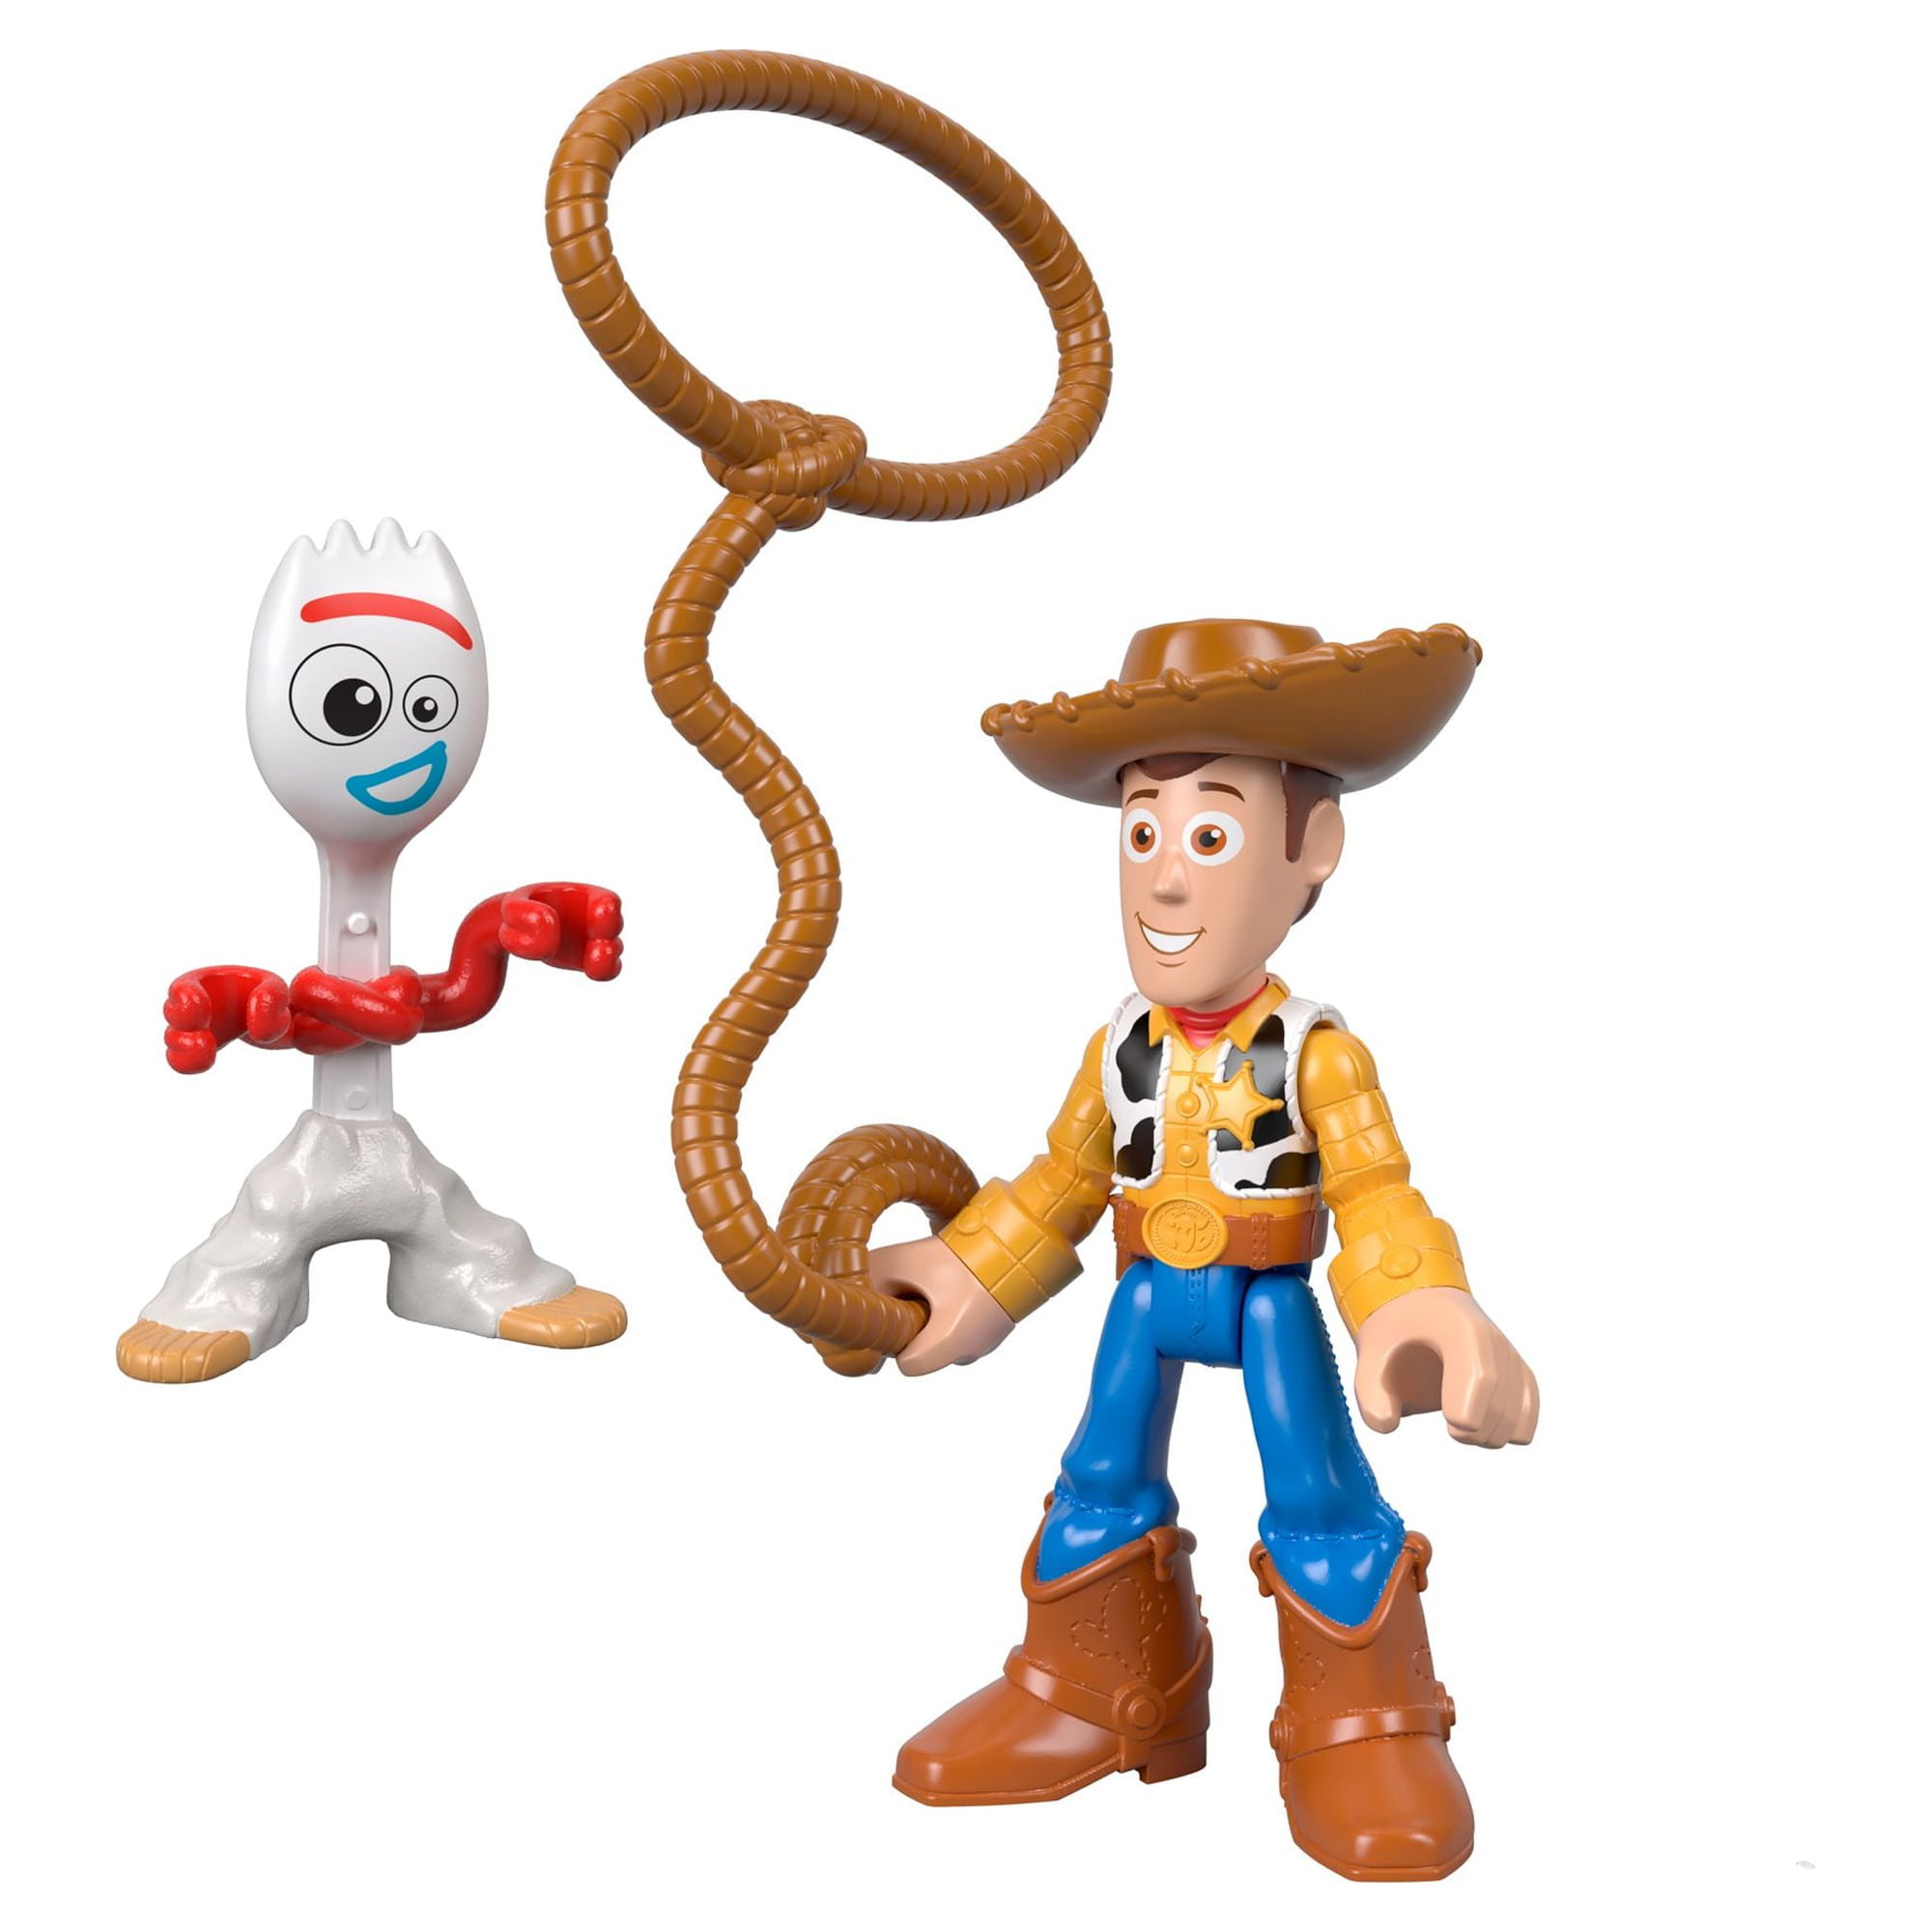 Imaginext Figures Featuring Disney Pixar Toy Story Forky & Woody